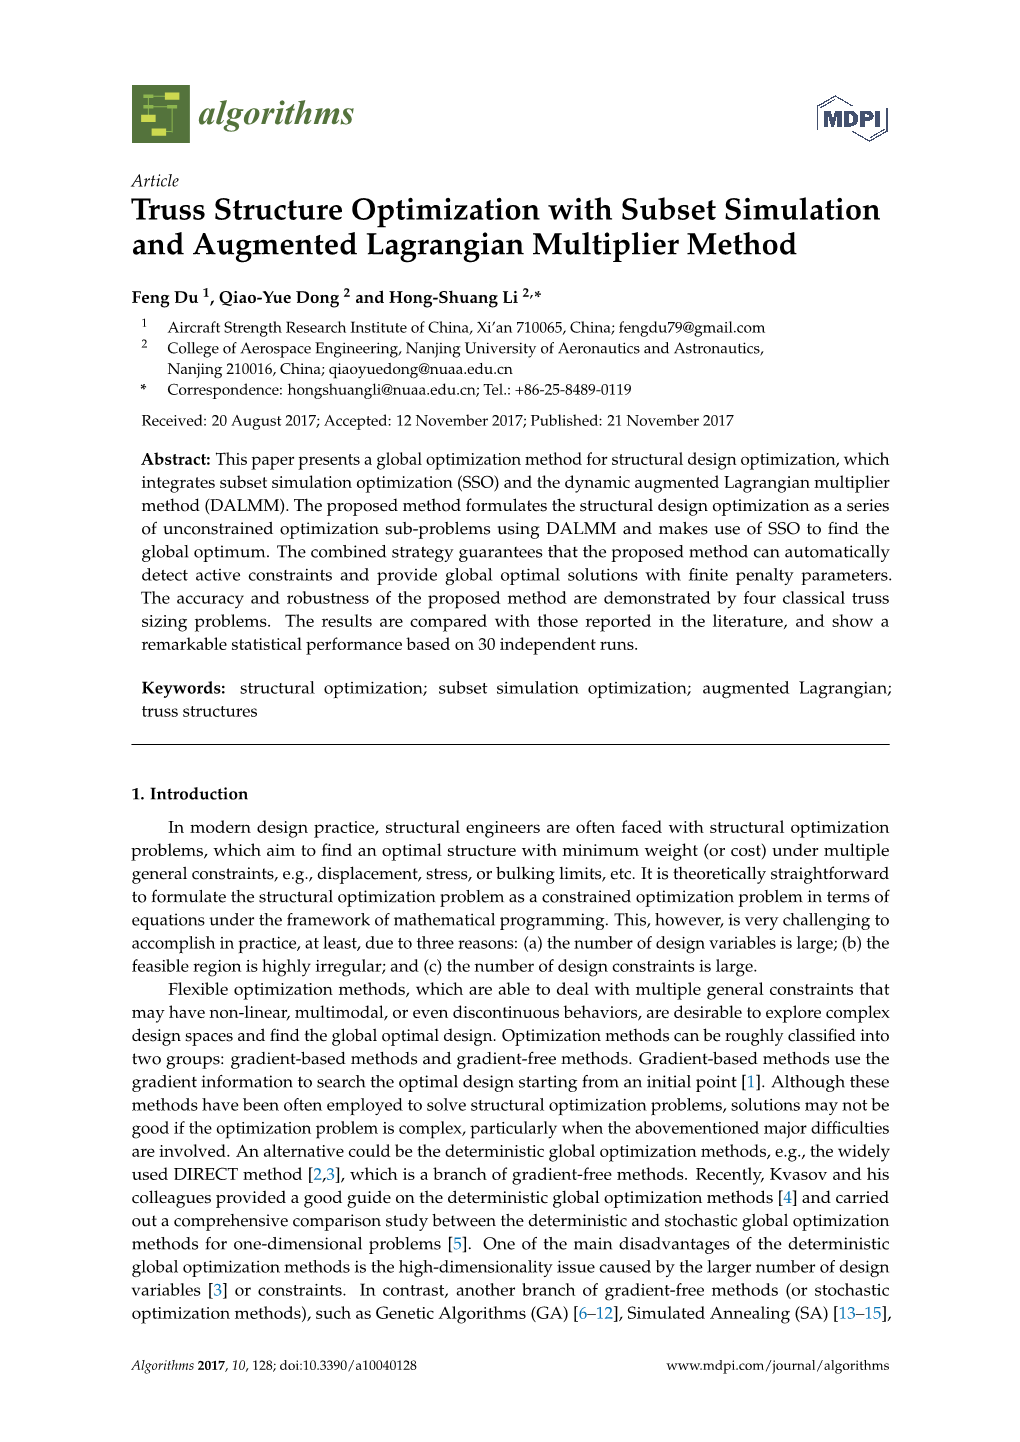 Truss Structure Optimization with Subset Simulation and Augmented Lagrangian Multiplier Method